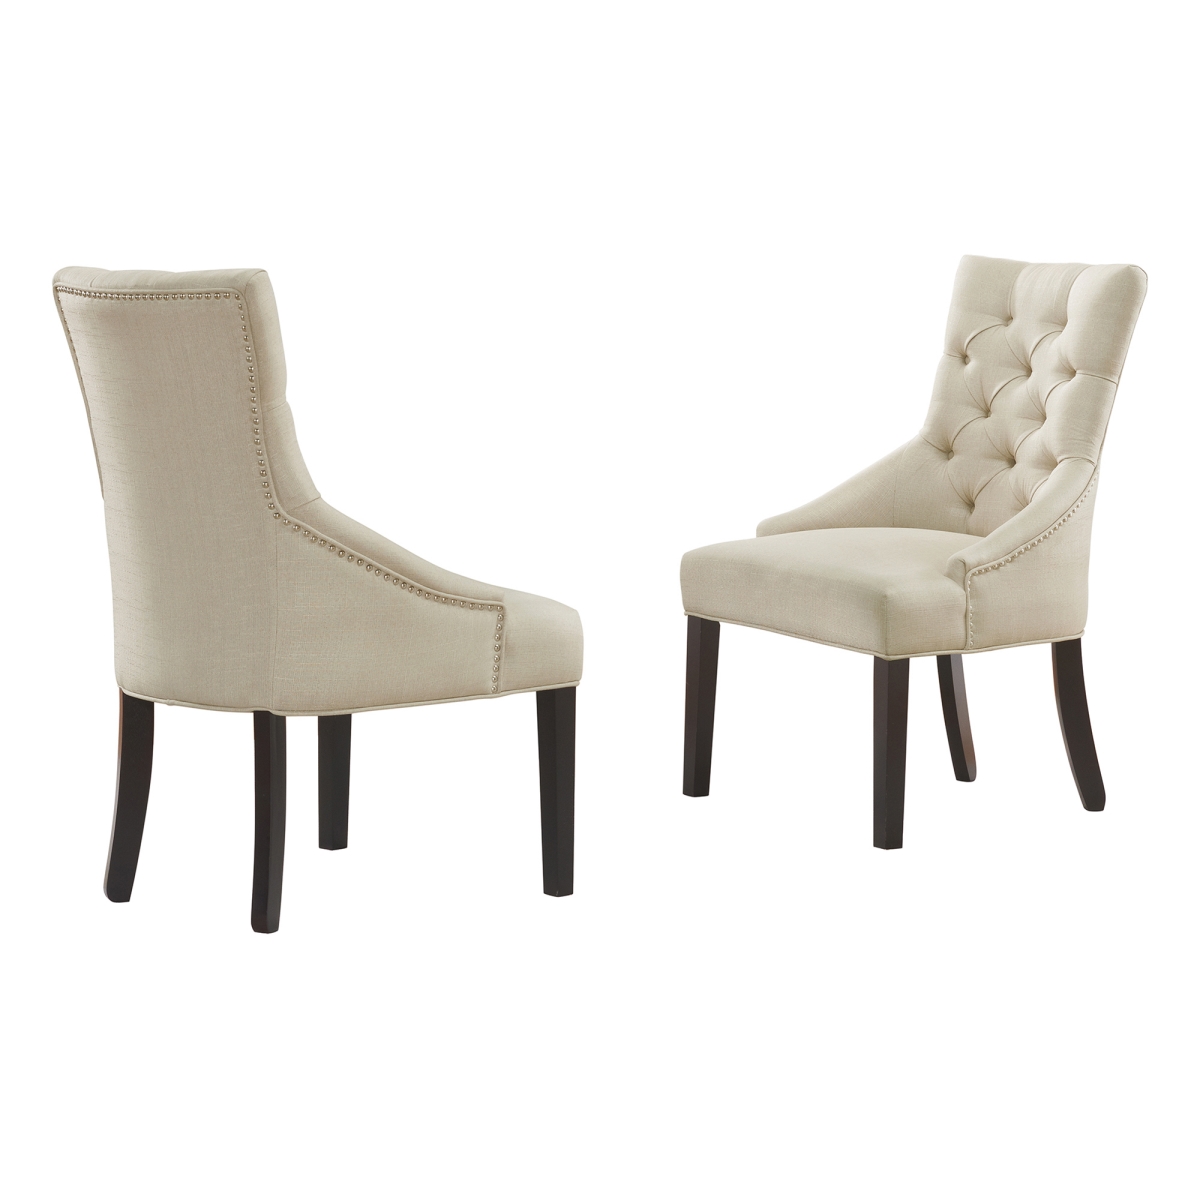 Picture of Alaterre ANHT01FDC Haeys Tufted Upholstered Dining Chairs - Cream - Set of 2